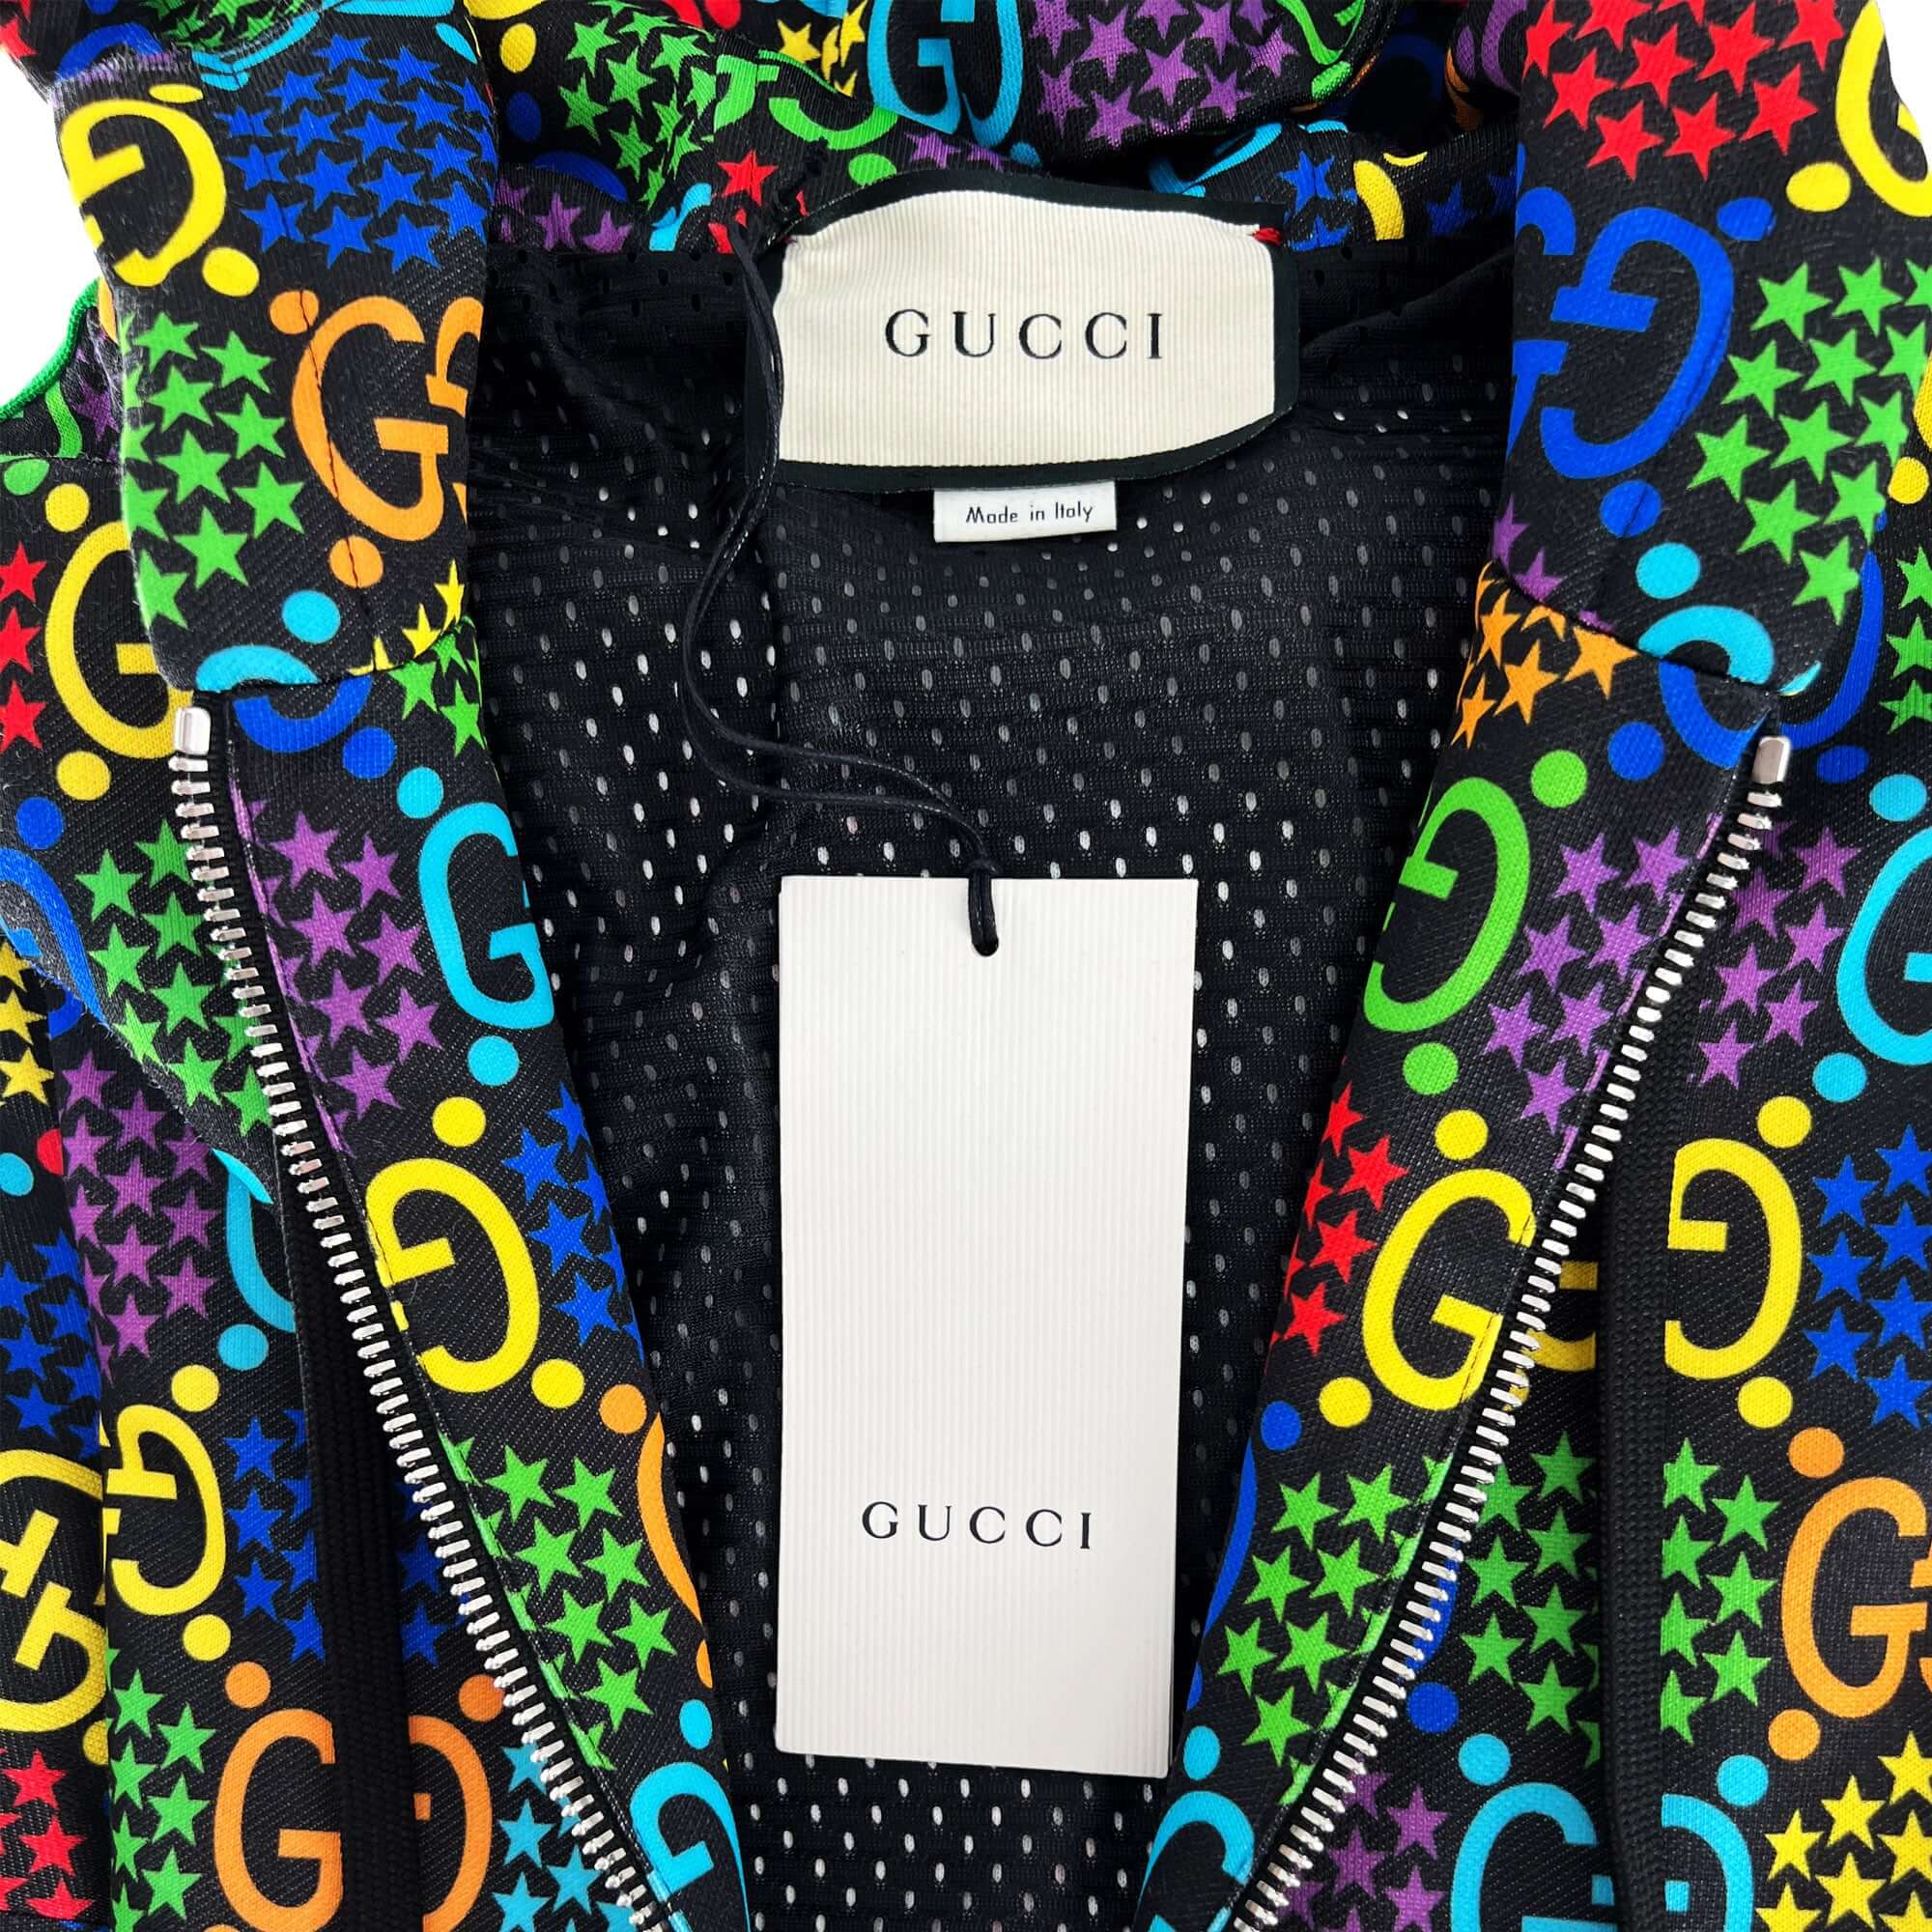 Gucci multicolour zip up hoodie